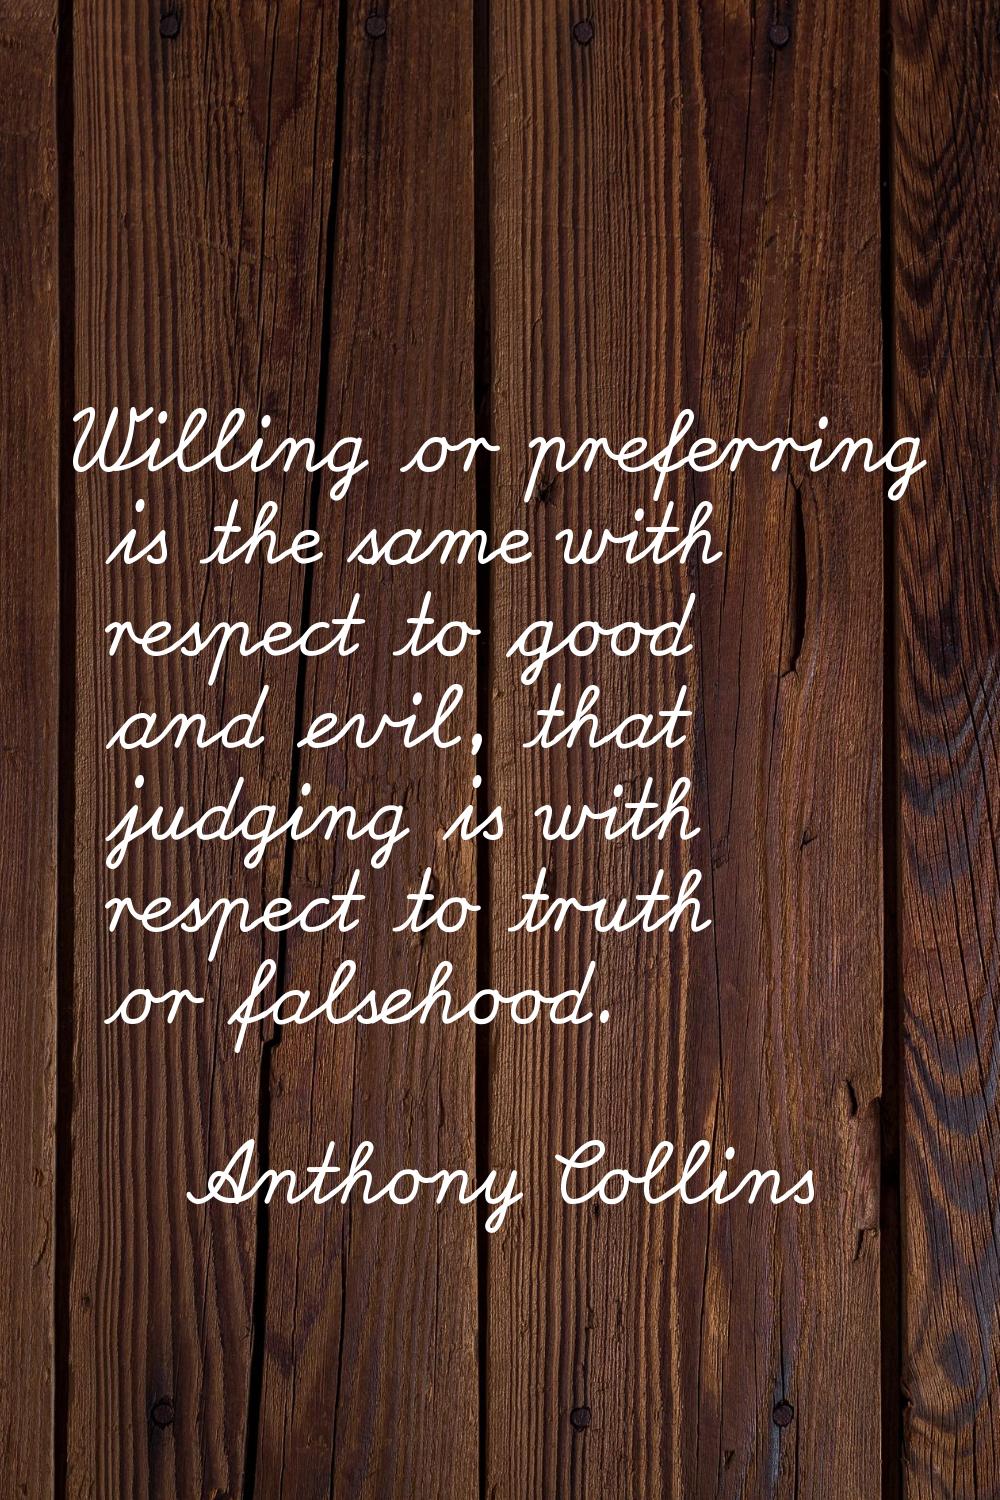 Willing or preferring is the same with respect to good and evil, that judging is with respect to tr